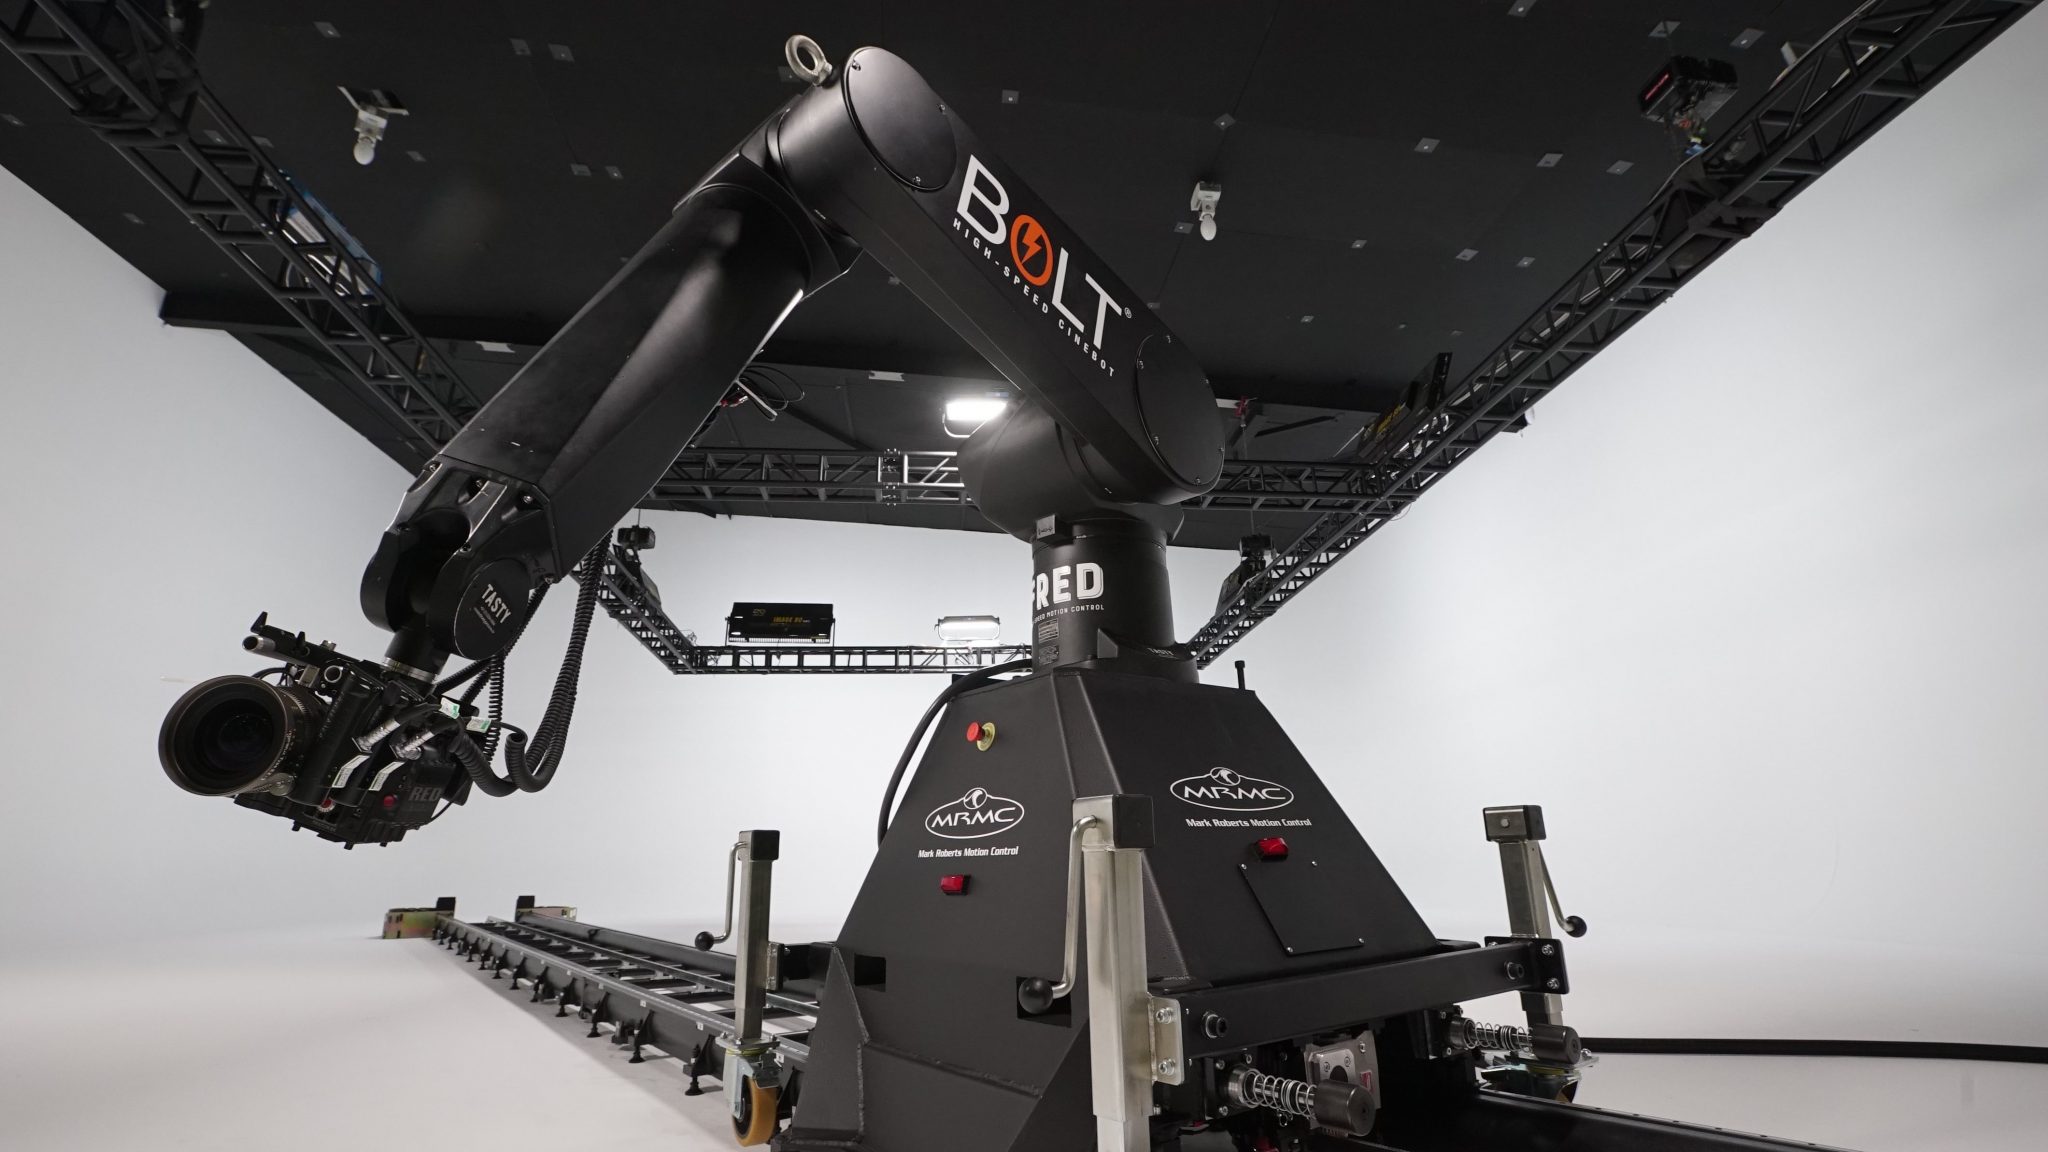 Shooting at 1400fps with the use of Robots - Newsshooter